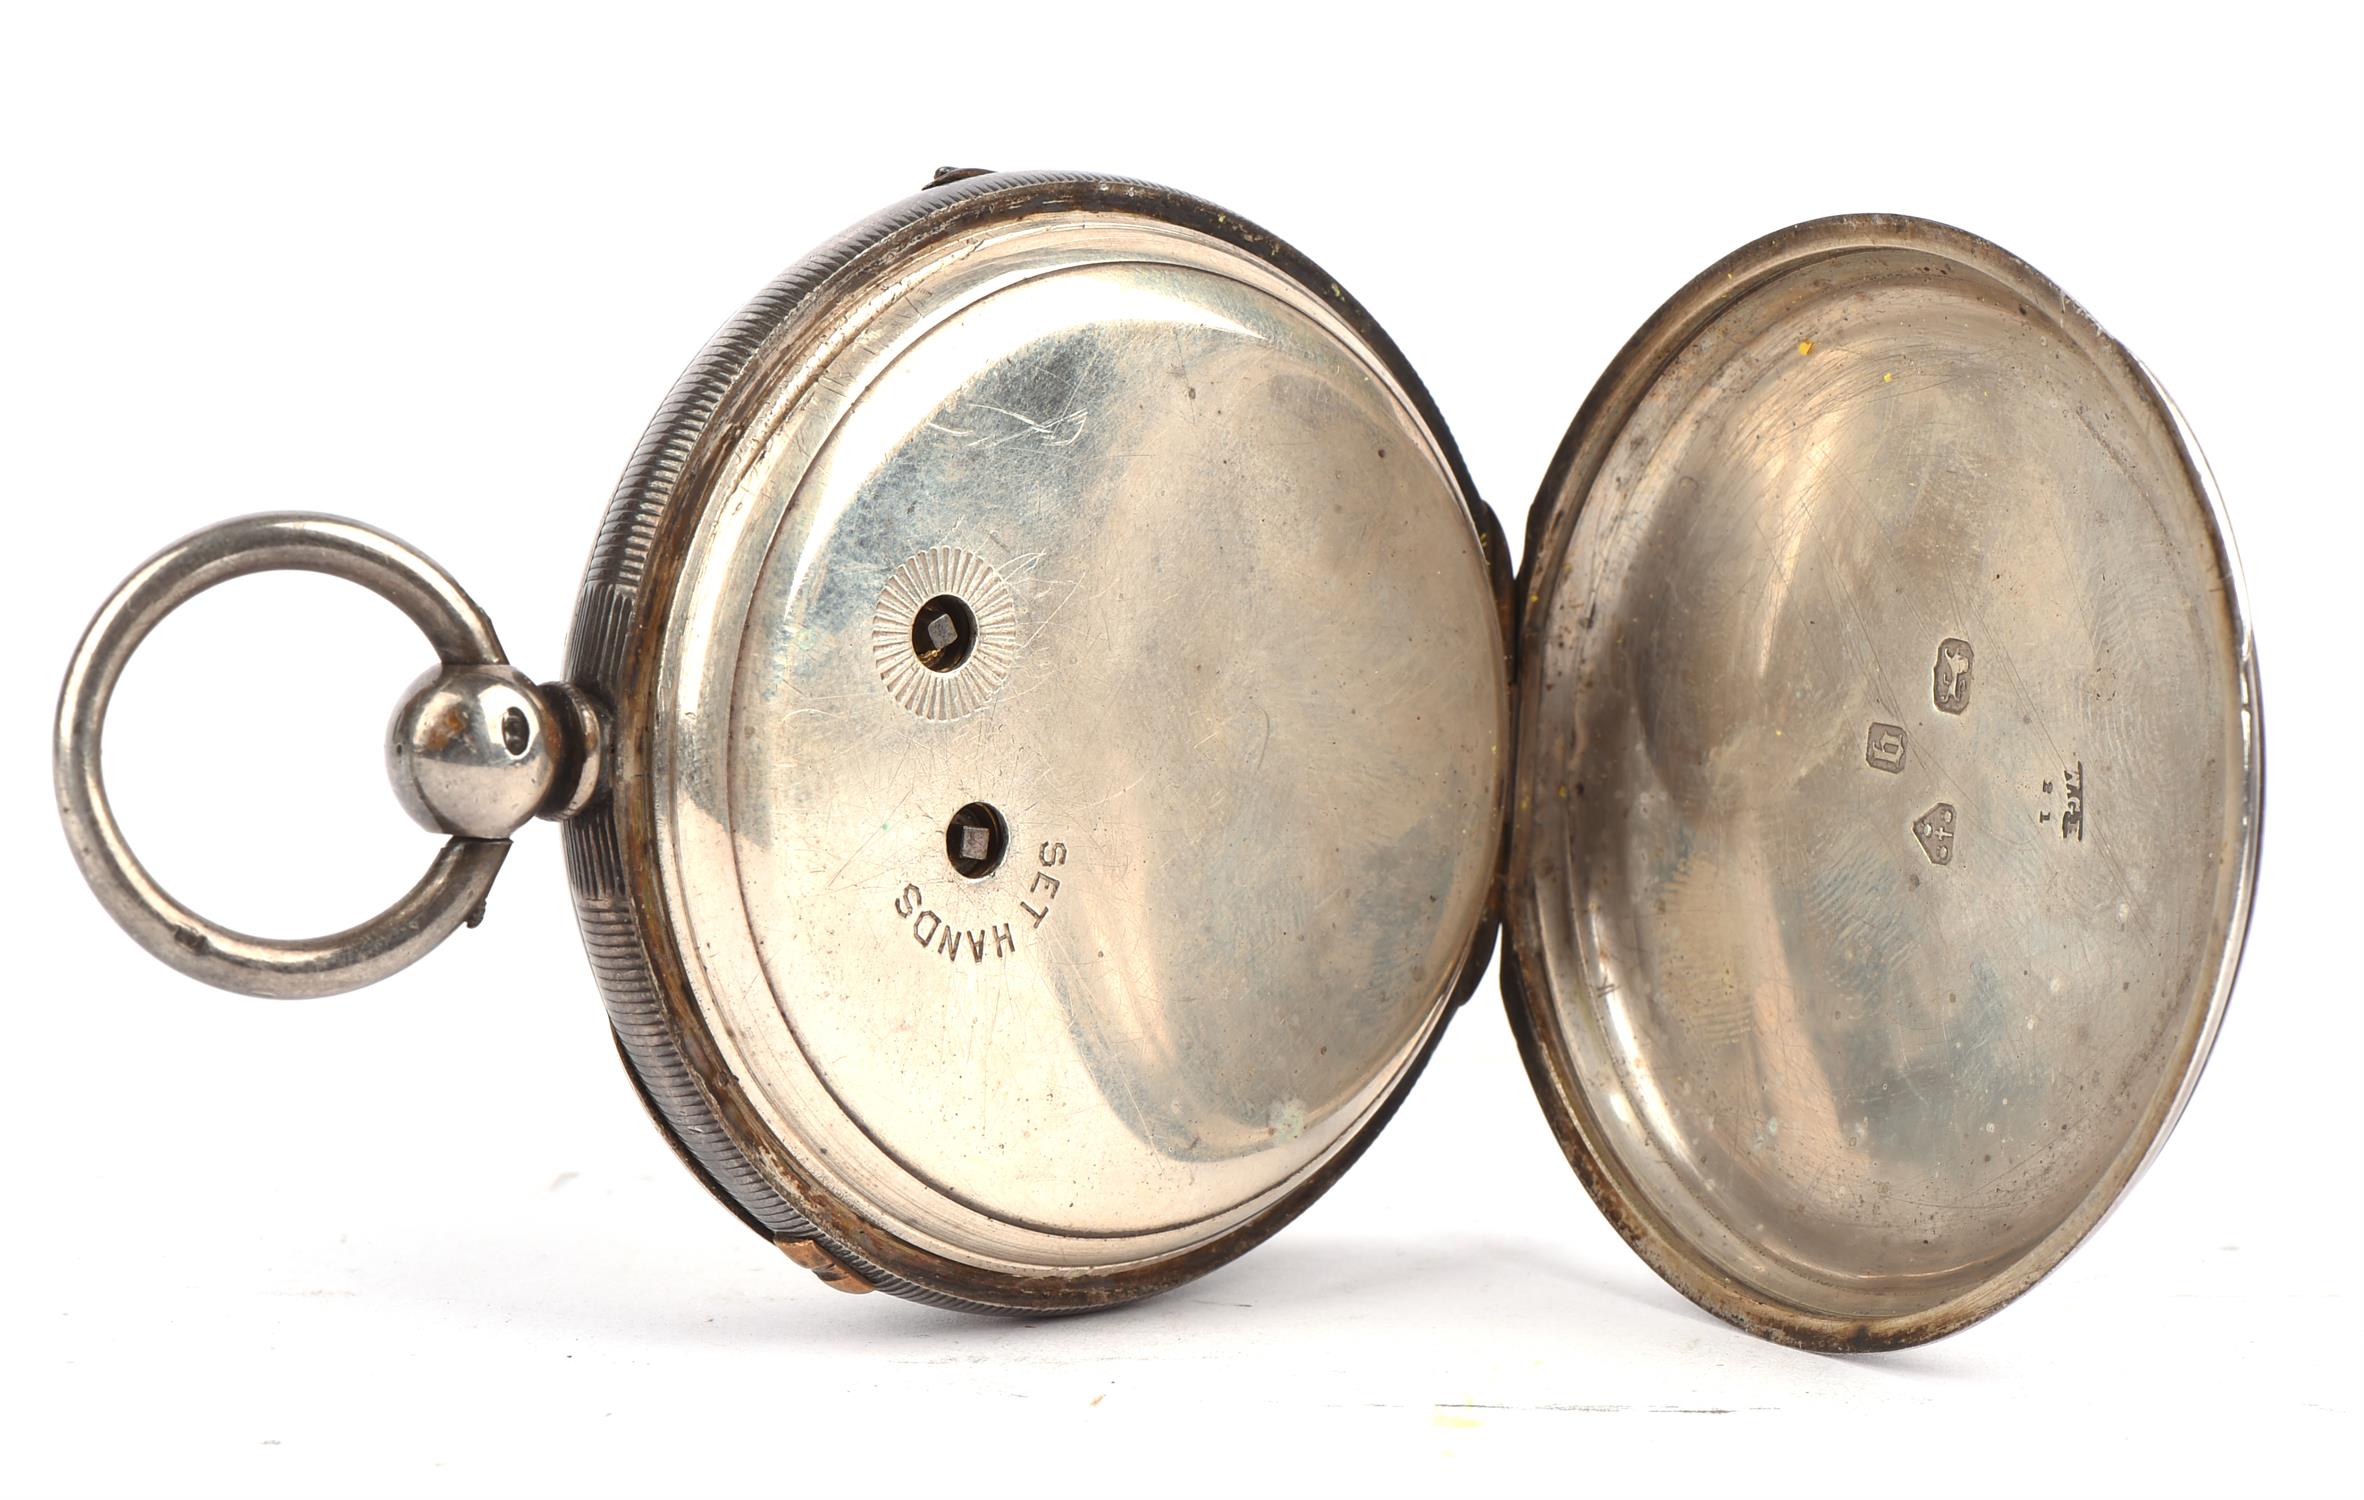 Large silver improved 51303 chronograph patent gents pocket watch, Chester, 1878 - Image 3 of 3